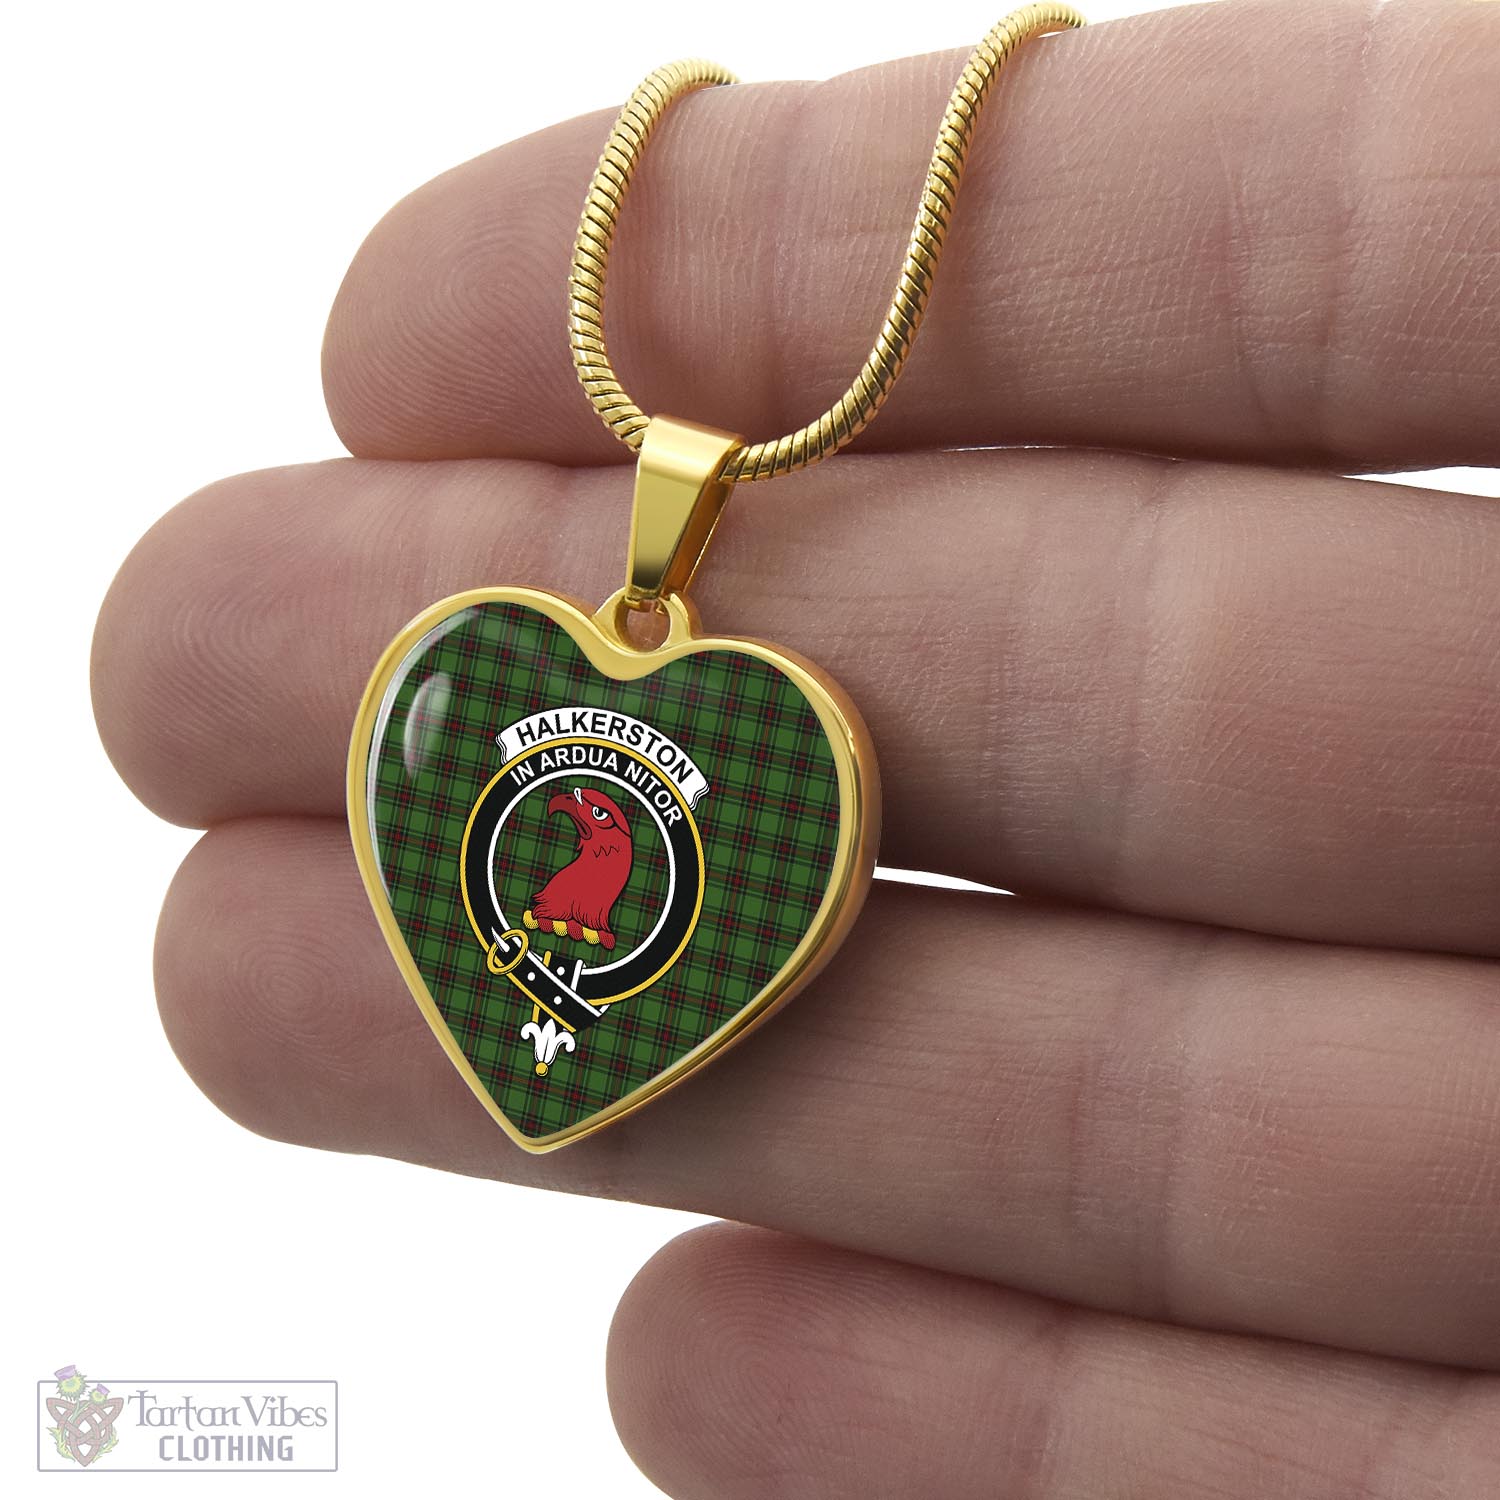 Tartan Vibes Clothing Halkerston Tartan Heart Necklace with Family Crest